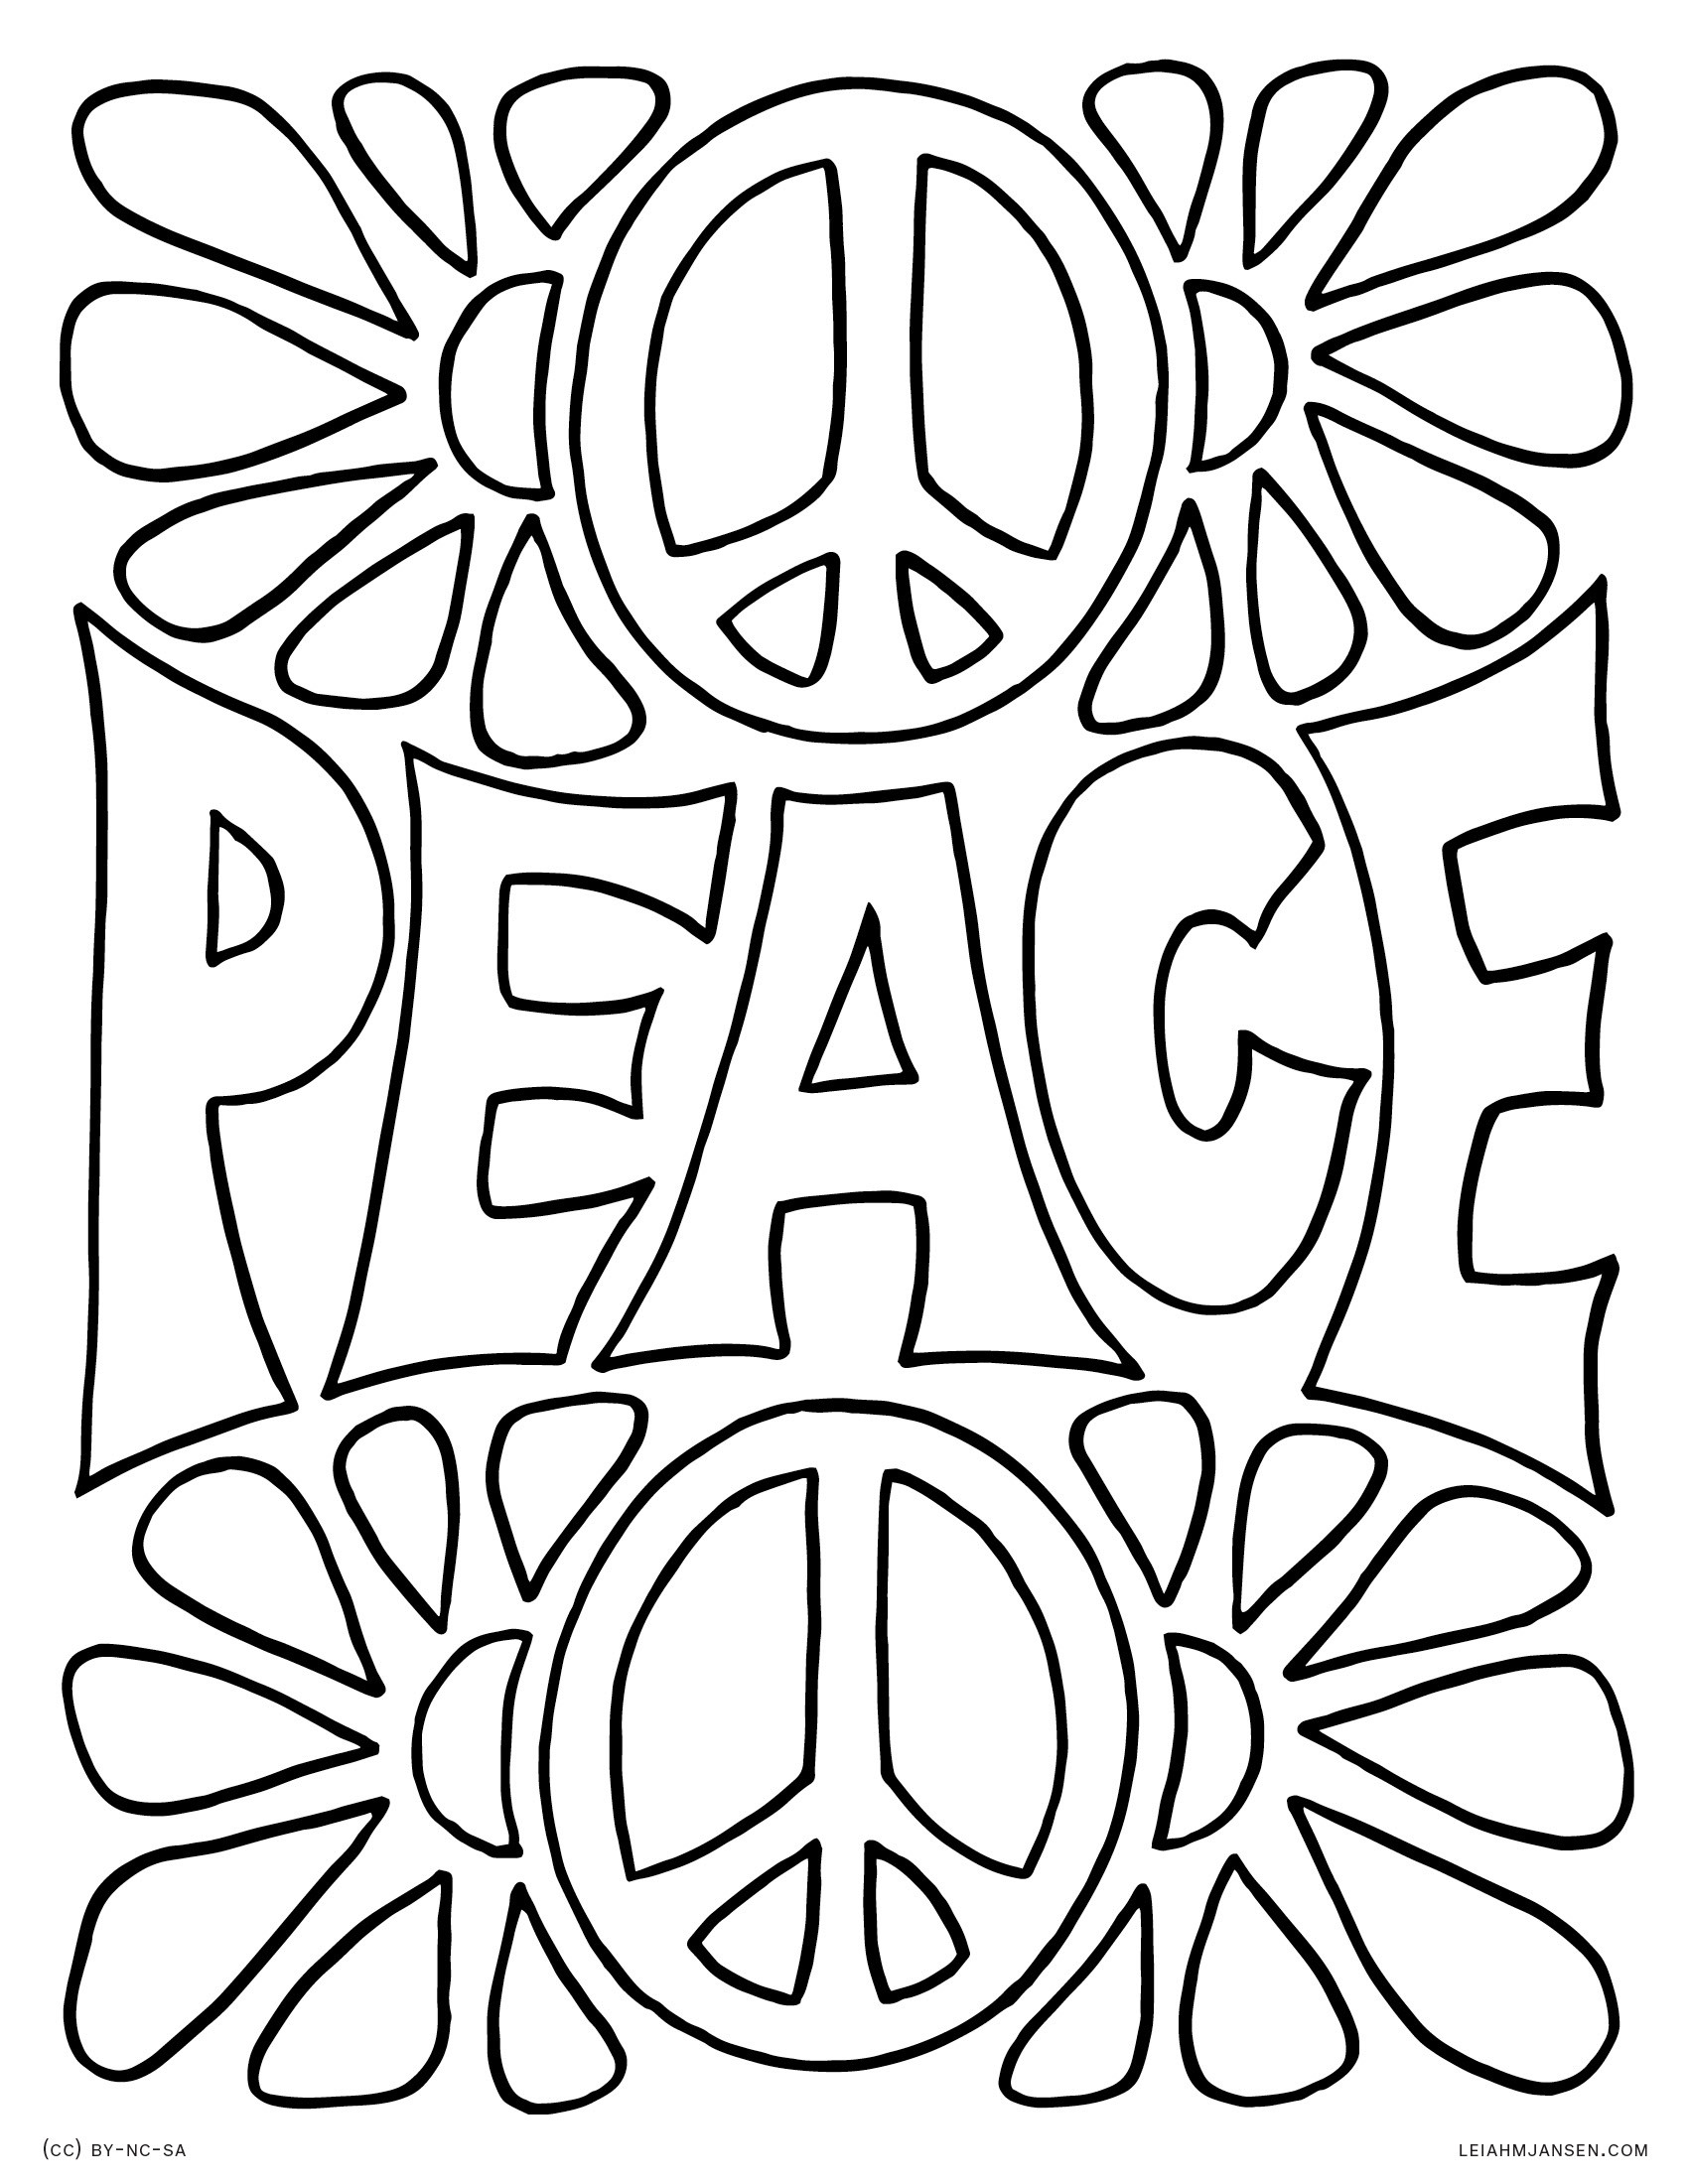 Peace Coloring Pages For Kids
 Coloring Pages